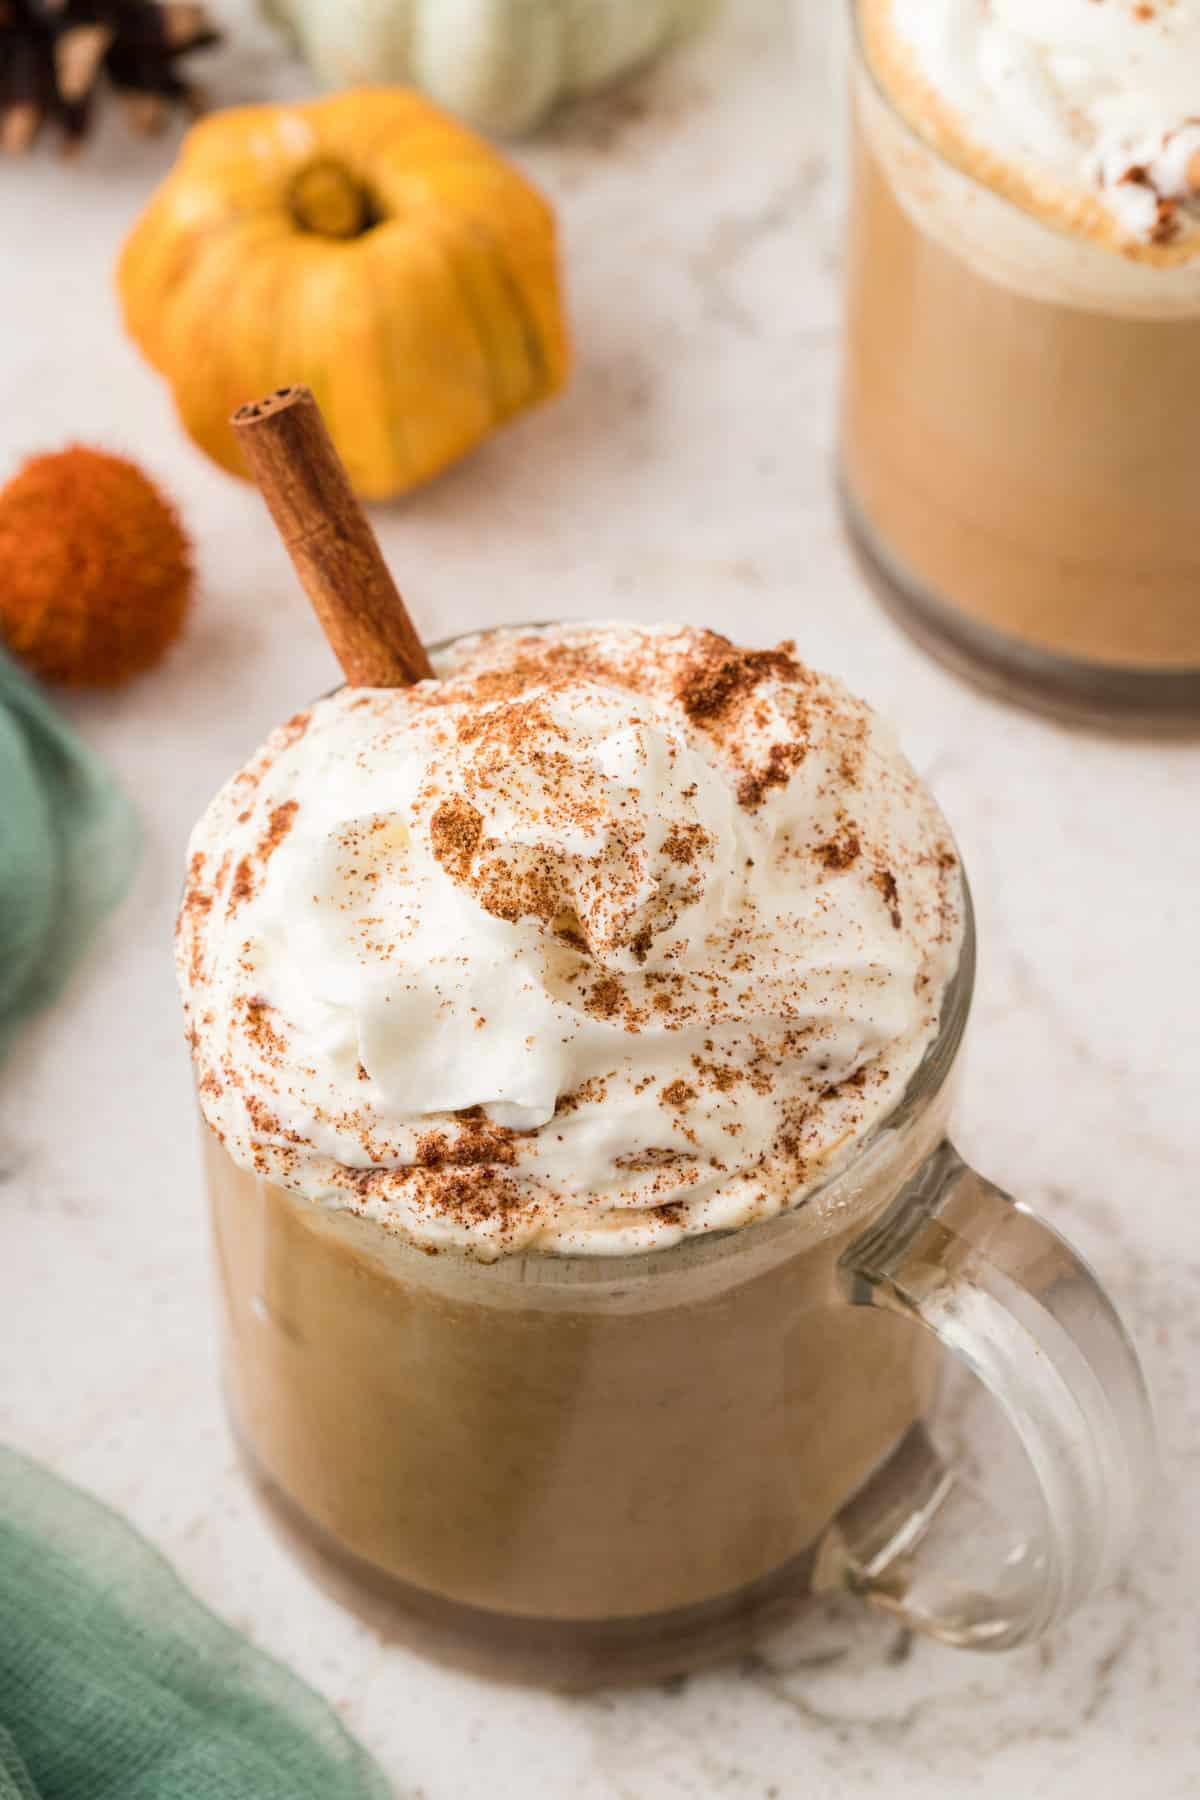 Straight on shot of a mug of pumpkin spice latte, with a cinnamon stick as garnish. Pumpkins in background.